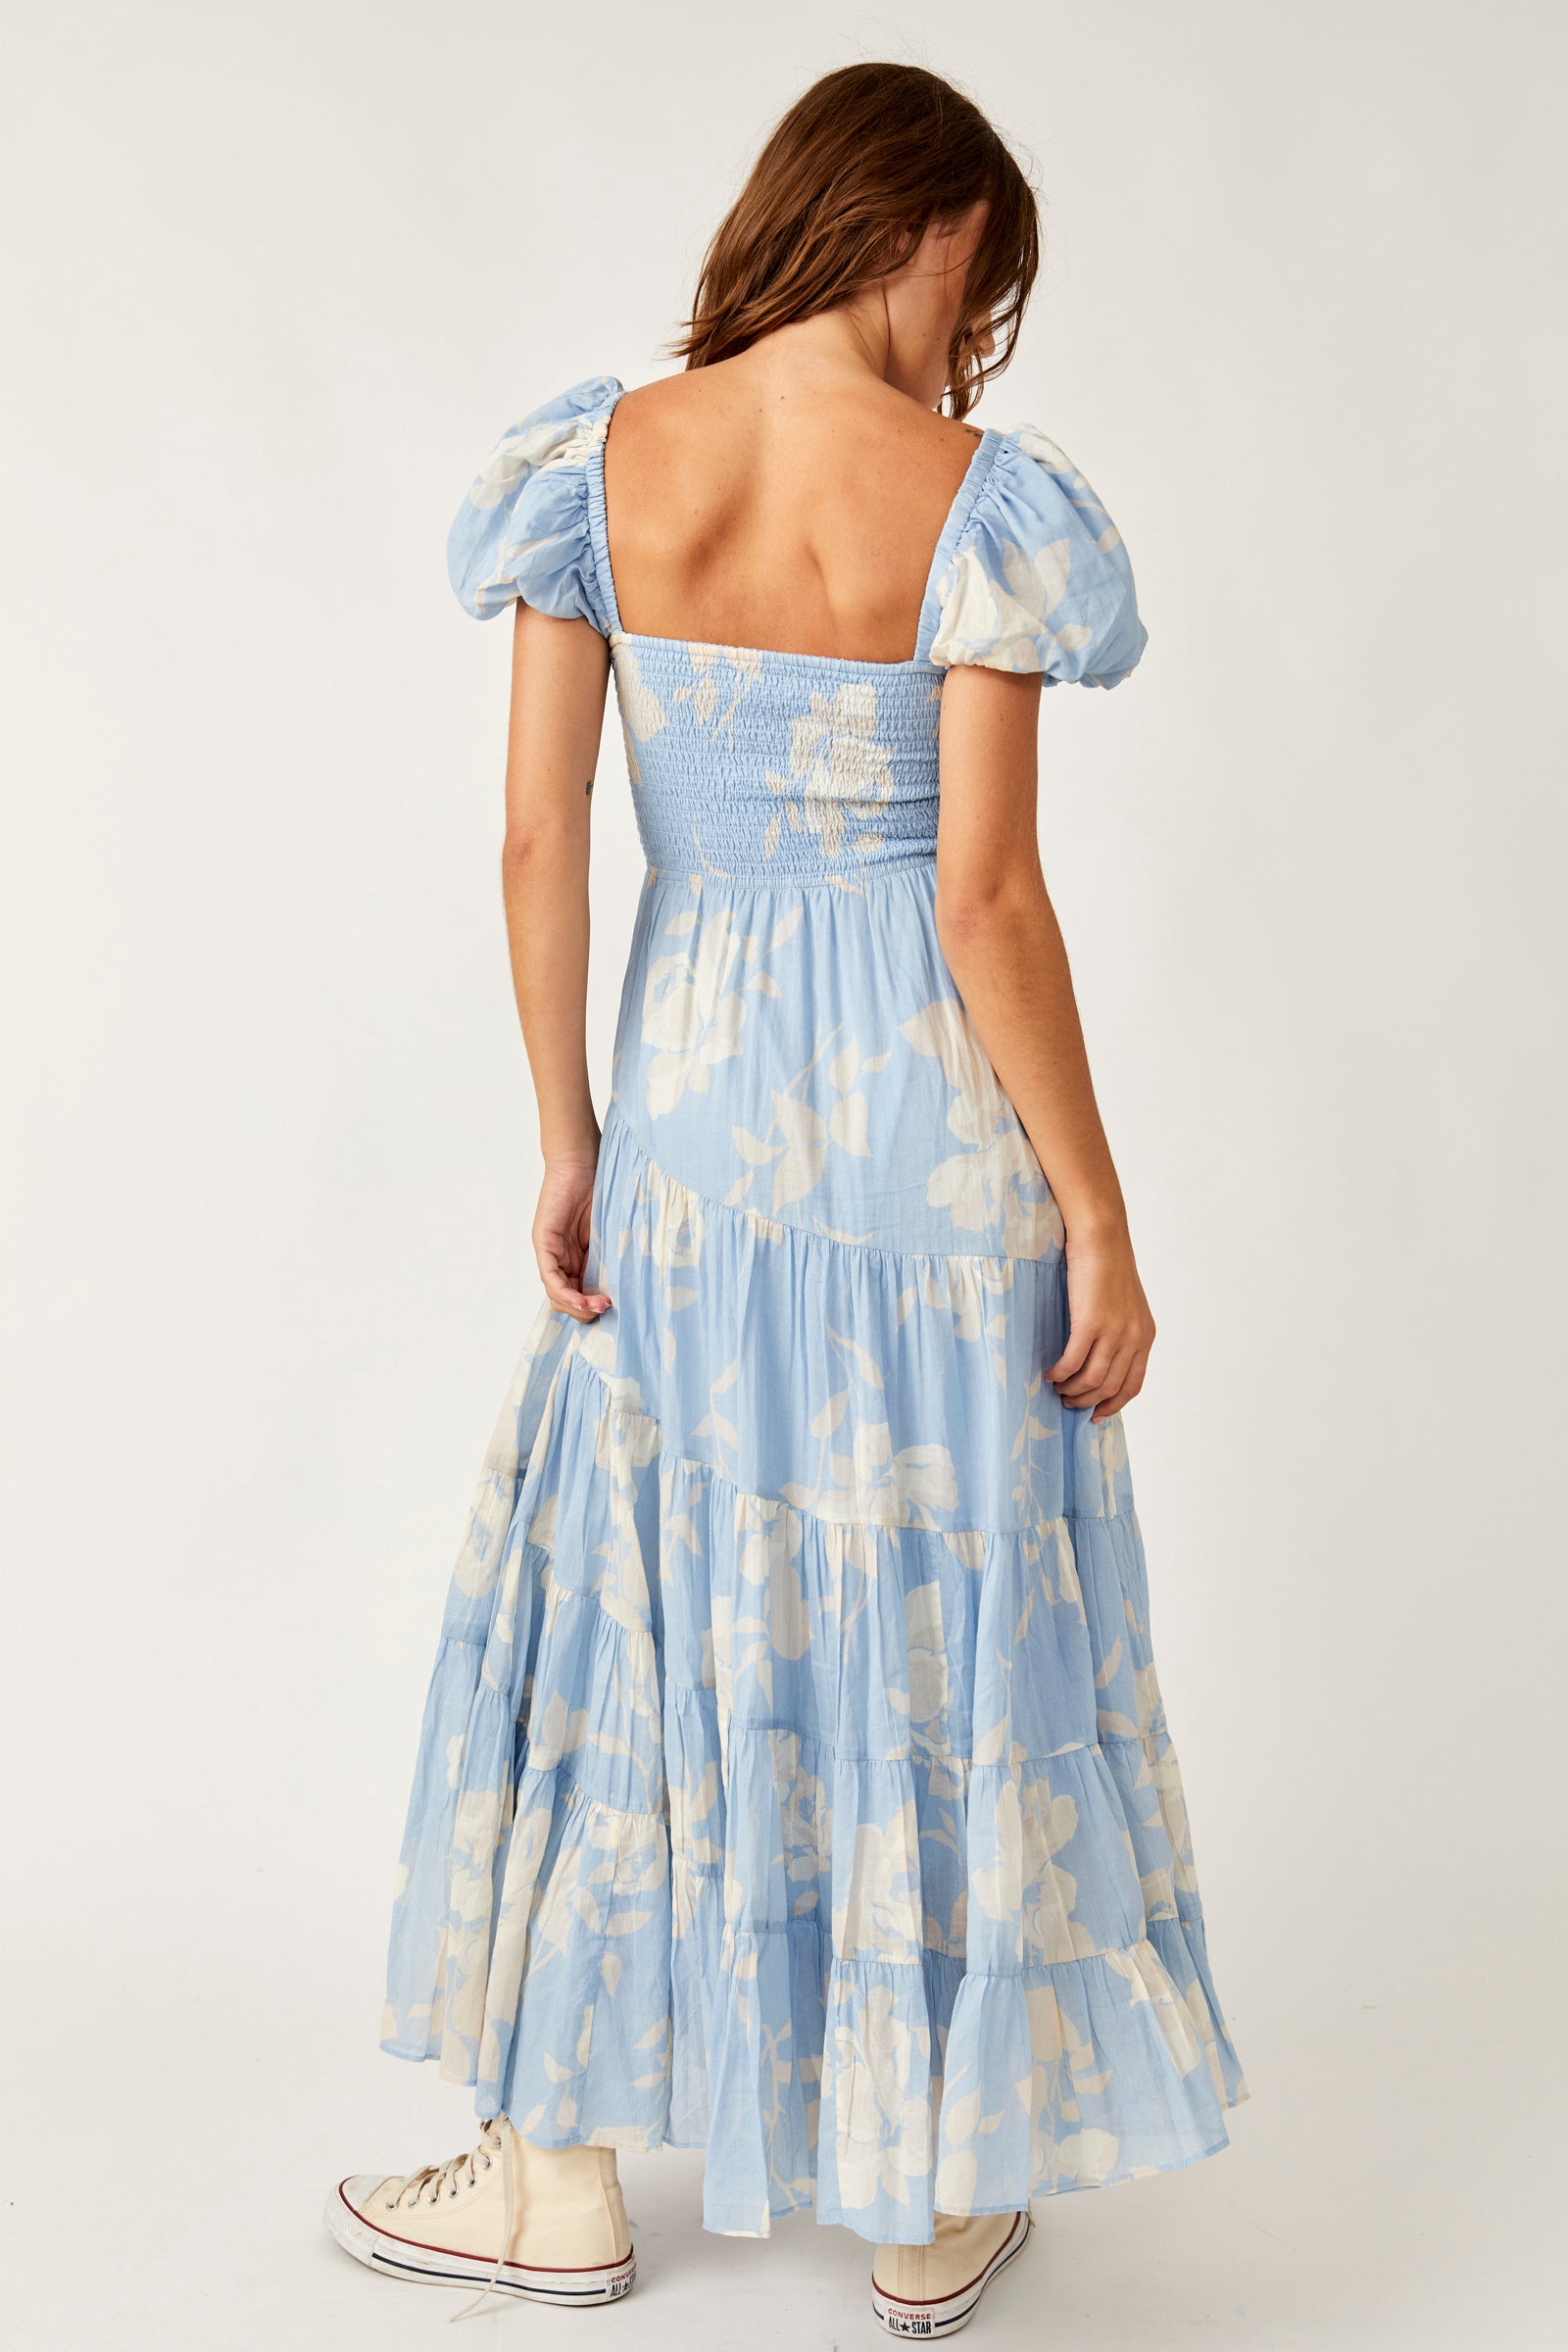 FREE PEOPLE SUNDRENCHED MIDI DRESS IN SKY COMBO